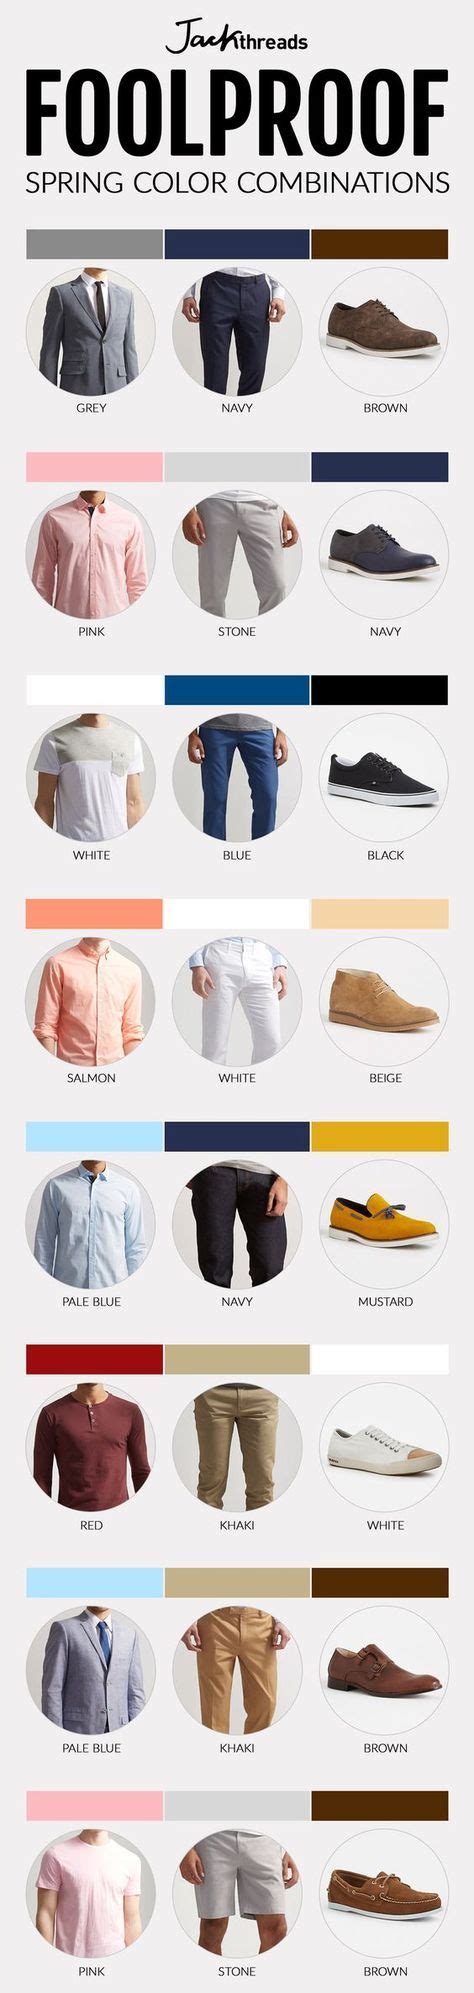 Men’s Guide To Matching Pant Shirt Color Combination Mens Fashion Men Style